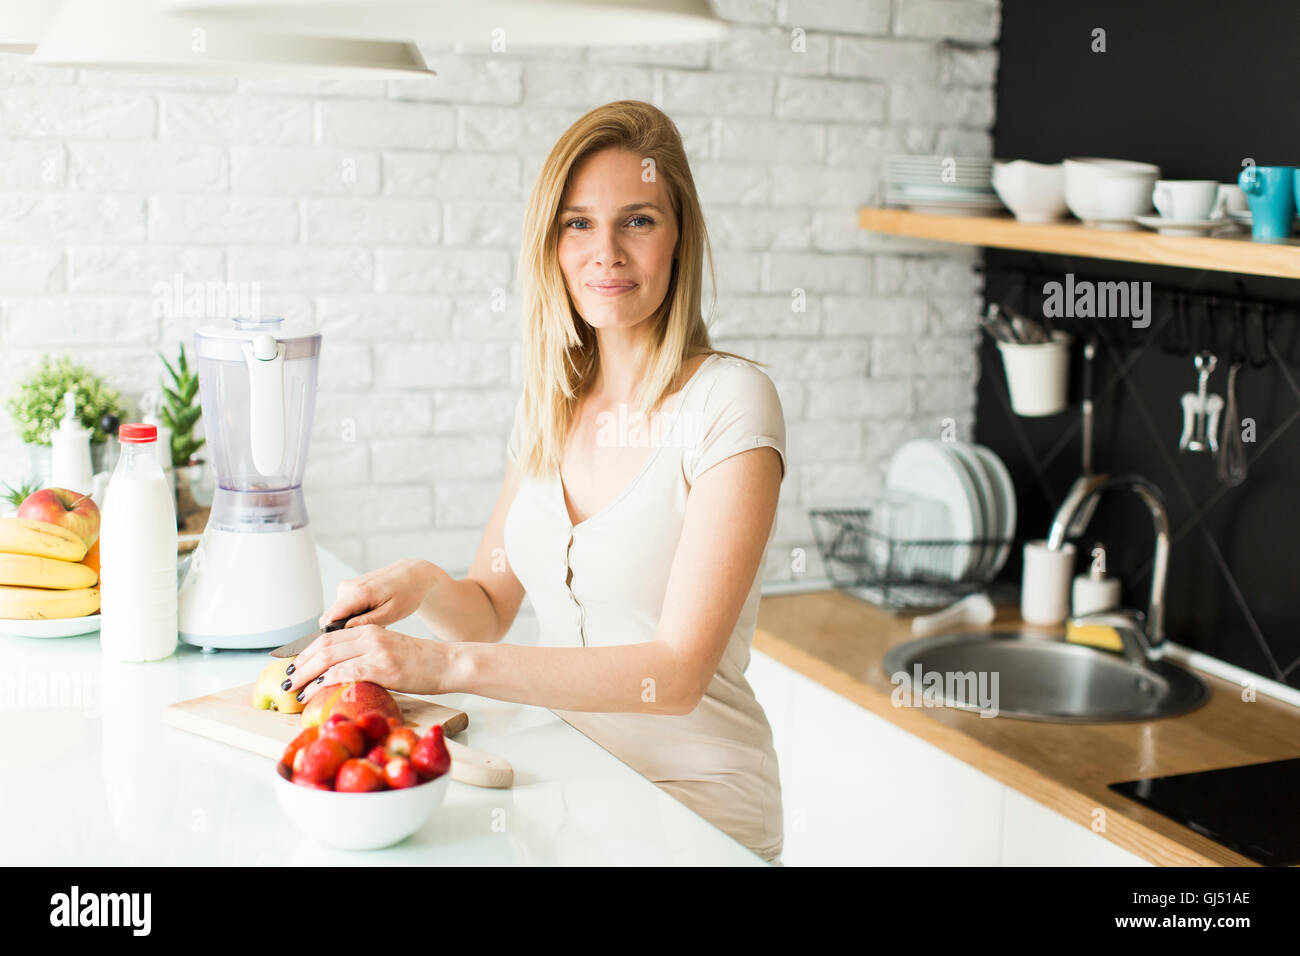 Pretty housewife standing at kitchen table with different fruit Stock Photo